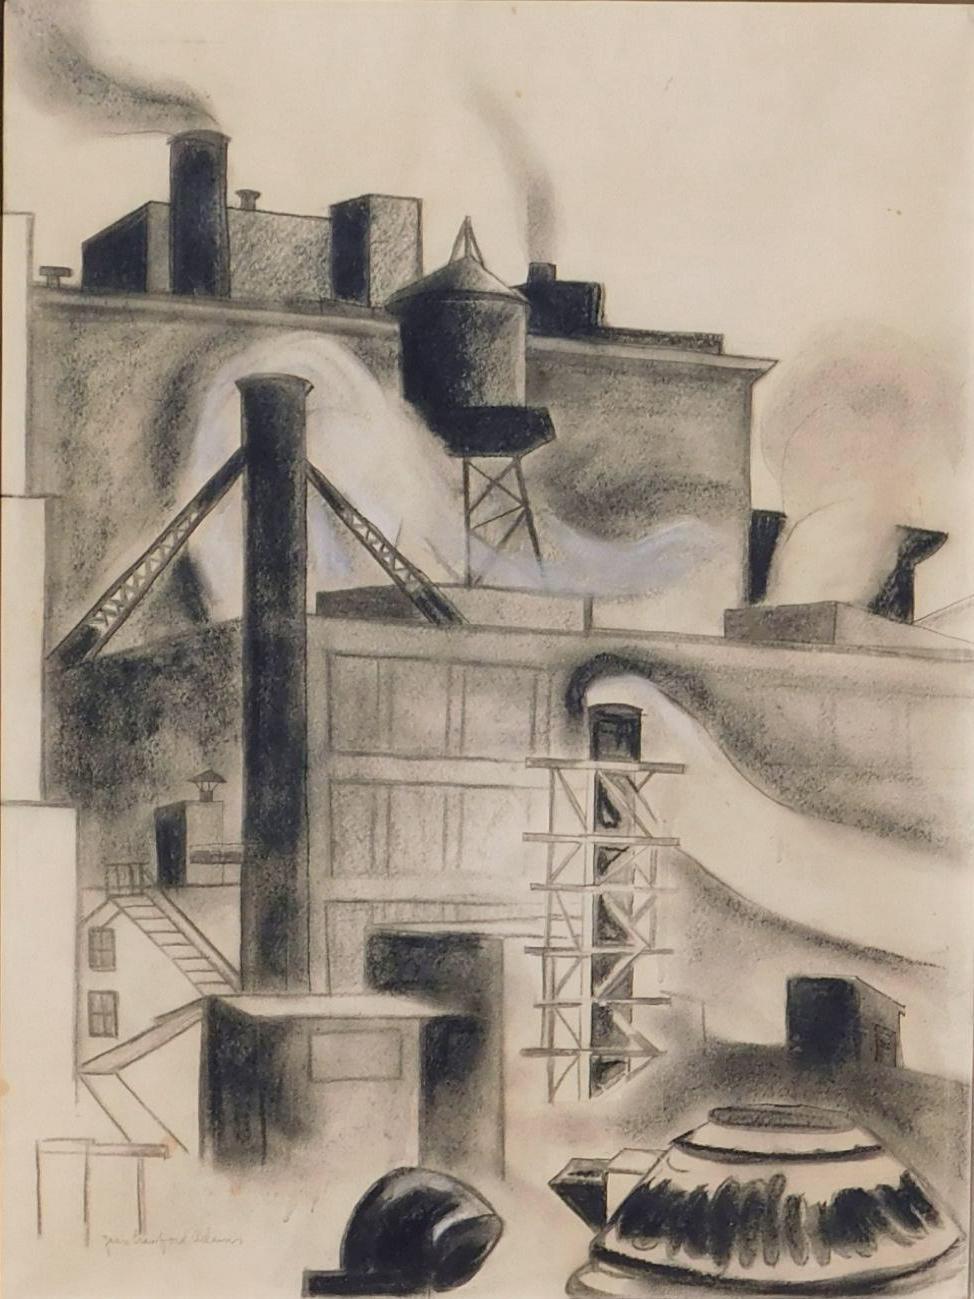 Original charcoal drawing by Chicago artist Jean Crawford Adams (1884-1972)
The work is signed in pencil lower left and is in excellent condition.
This is a working drawing, most likely a study for one of her industrial paintings.
Titled: “View from